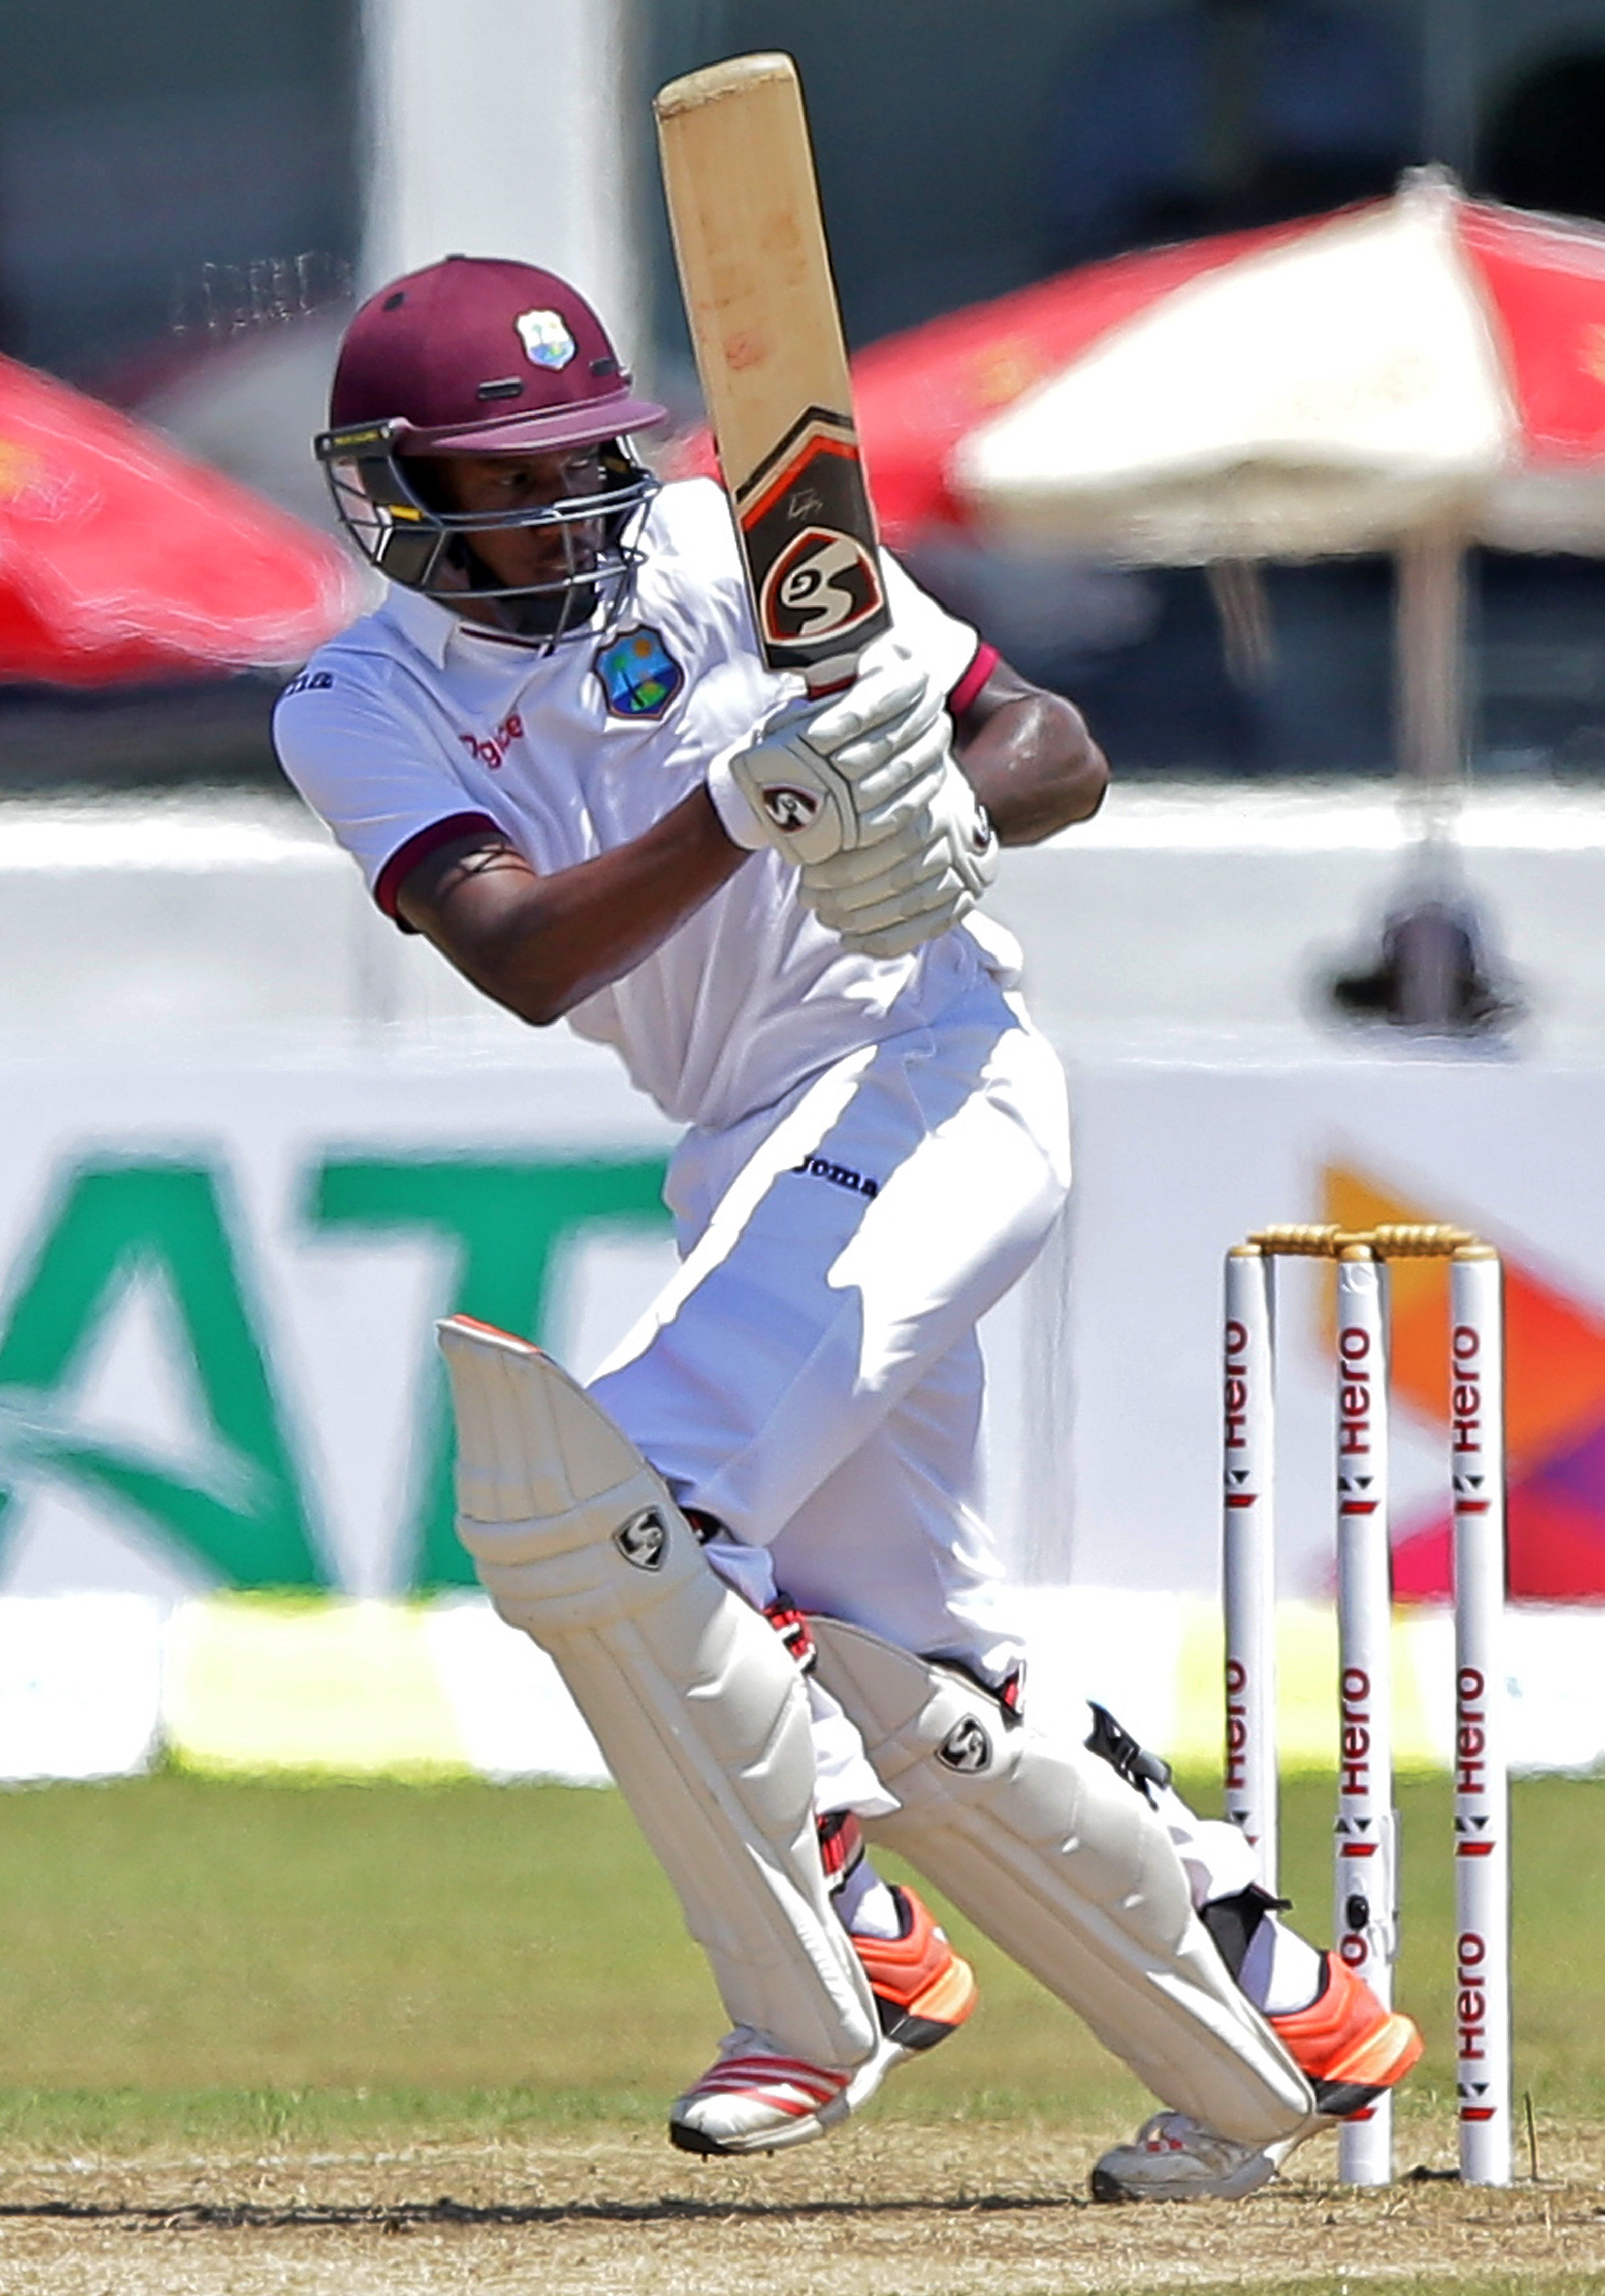 West Indiesu0092 cricketer Jermaine Blackwood bats during the third day of the first test cricket match against Sri Lanka in Galle, Sri Lanka, Friday, Oct. 16, 2015. ( AP Photo/ Pamod Nilru )